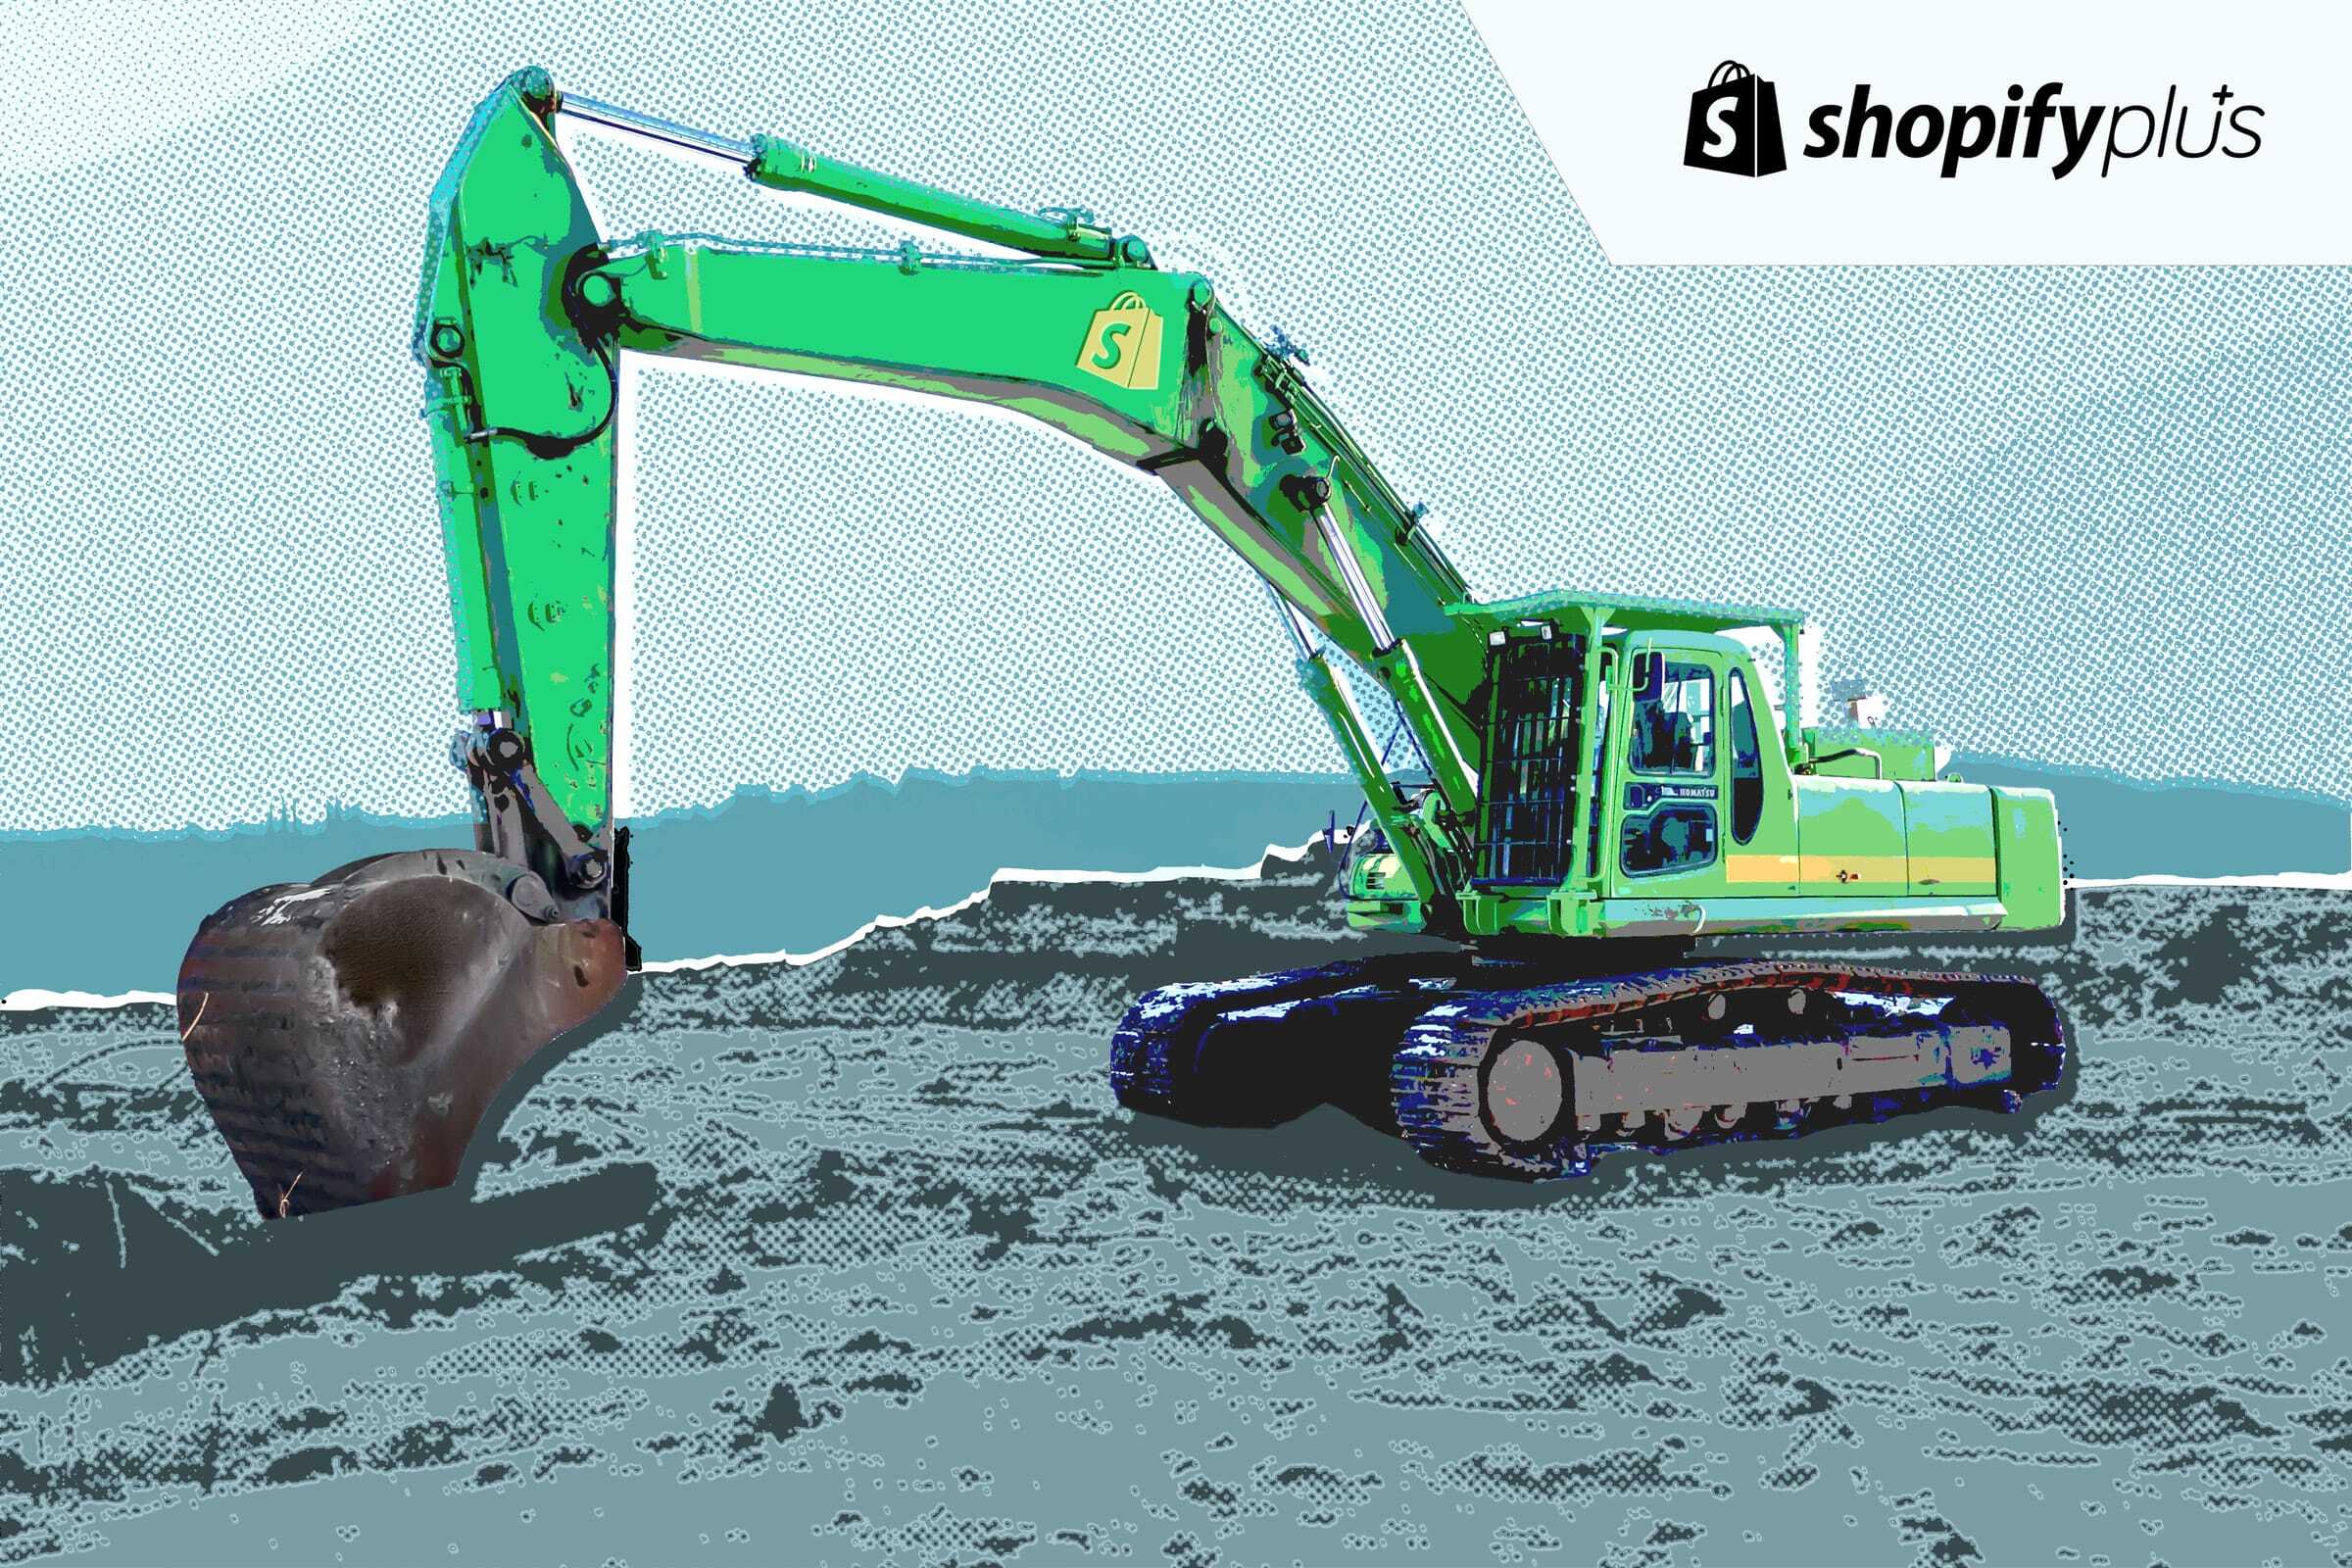 a green excavator digging into the ground